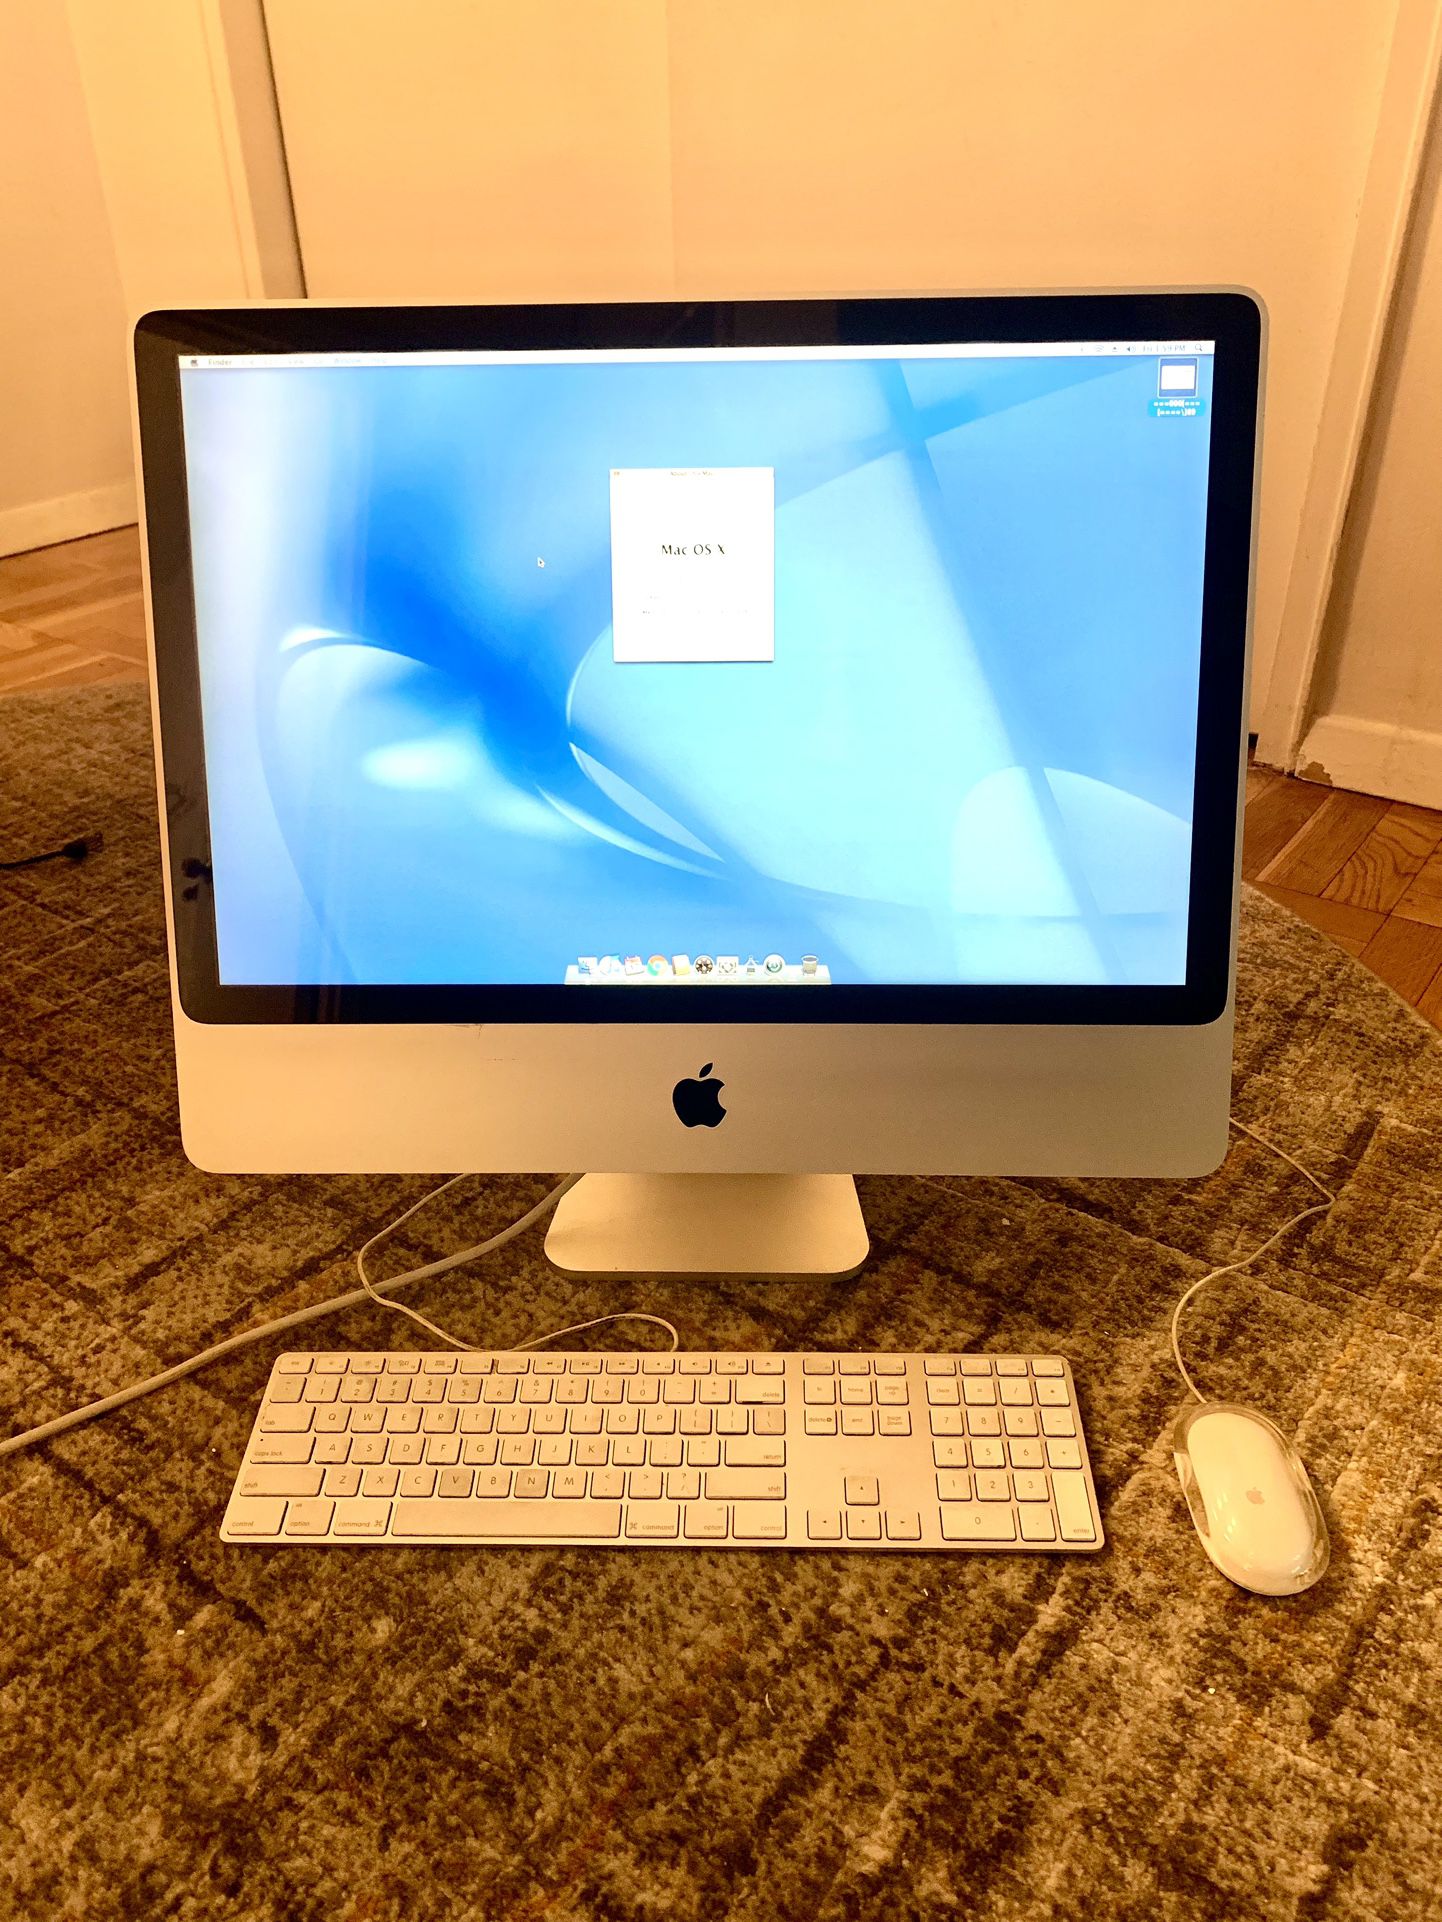 IMAC 24”  2008 IN GREAT WORKING CONDITION 